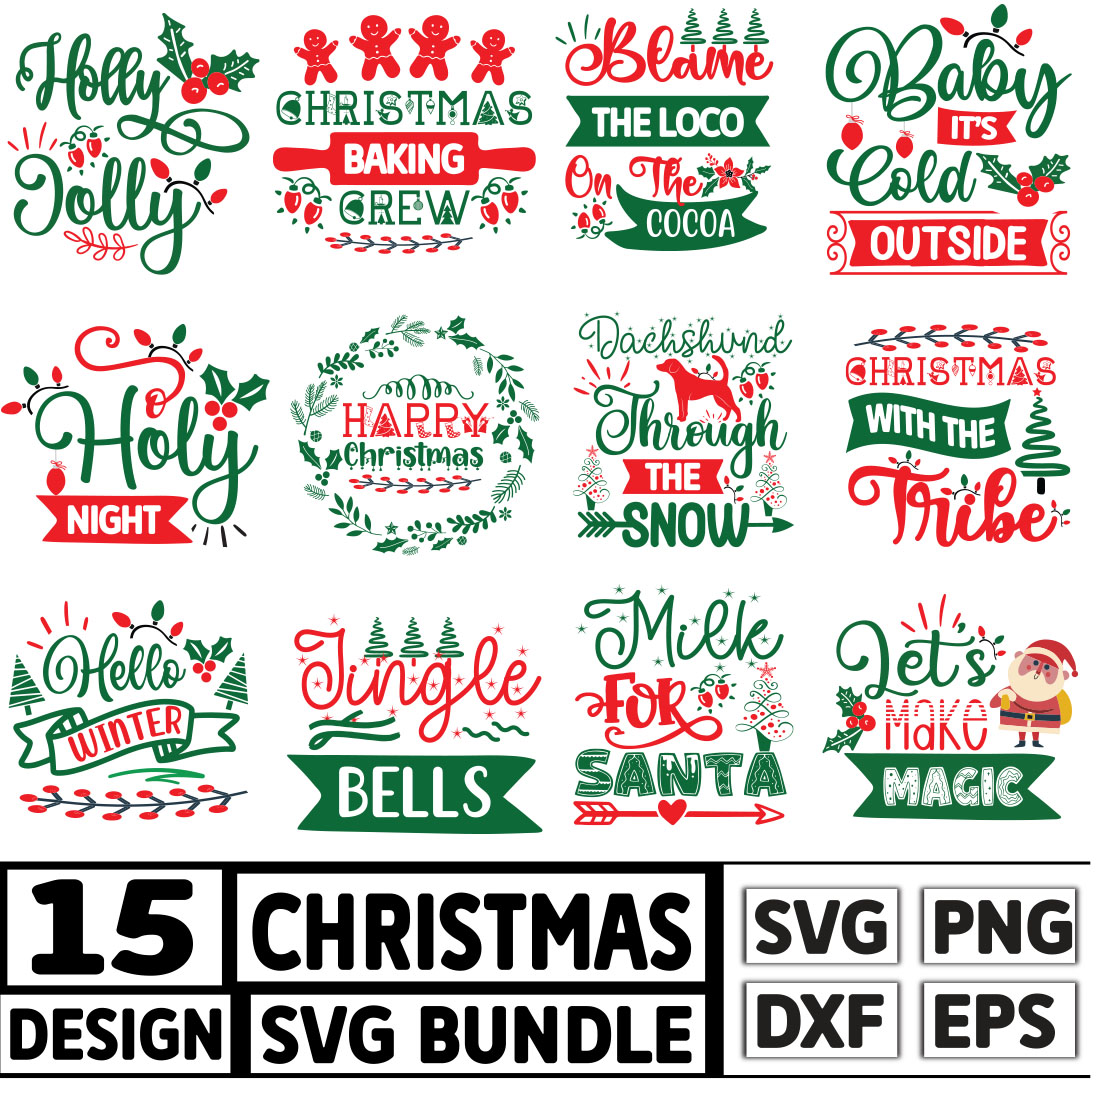 Quotes Christmas SVG Design cover image.